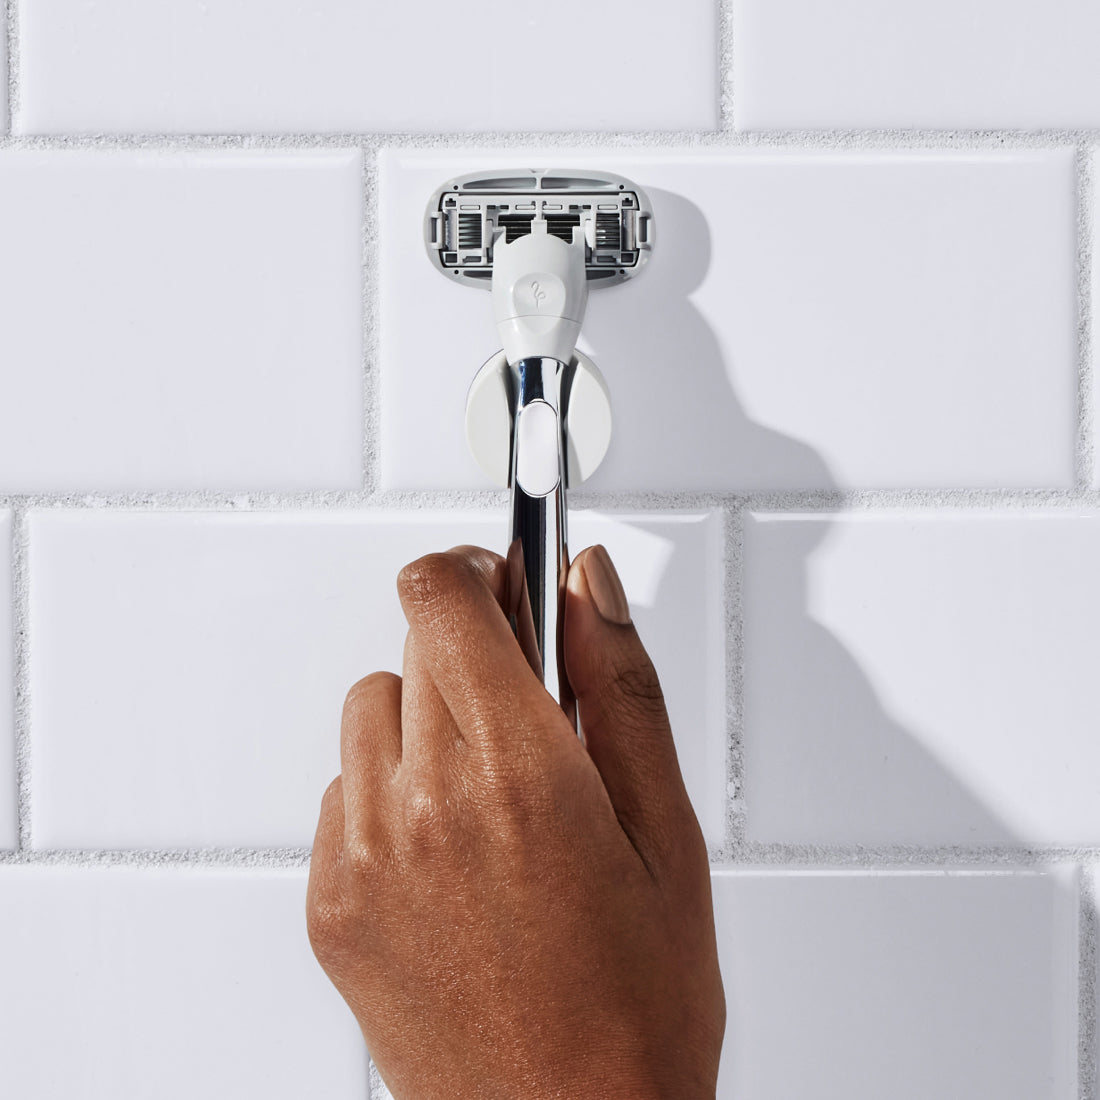 Woman removing the Polished Chrome Flamingo Razor from its shower holder on a white bathroom wall